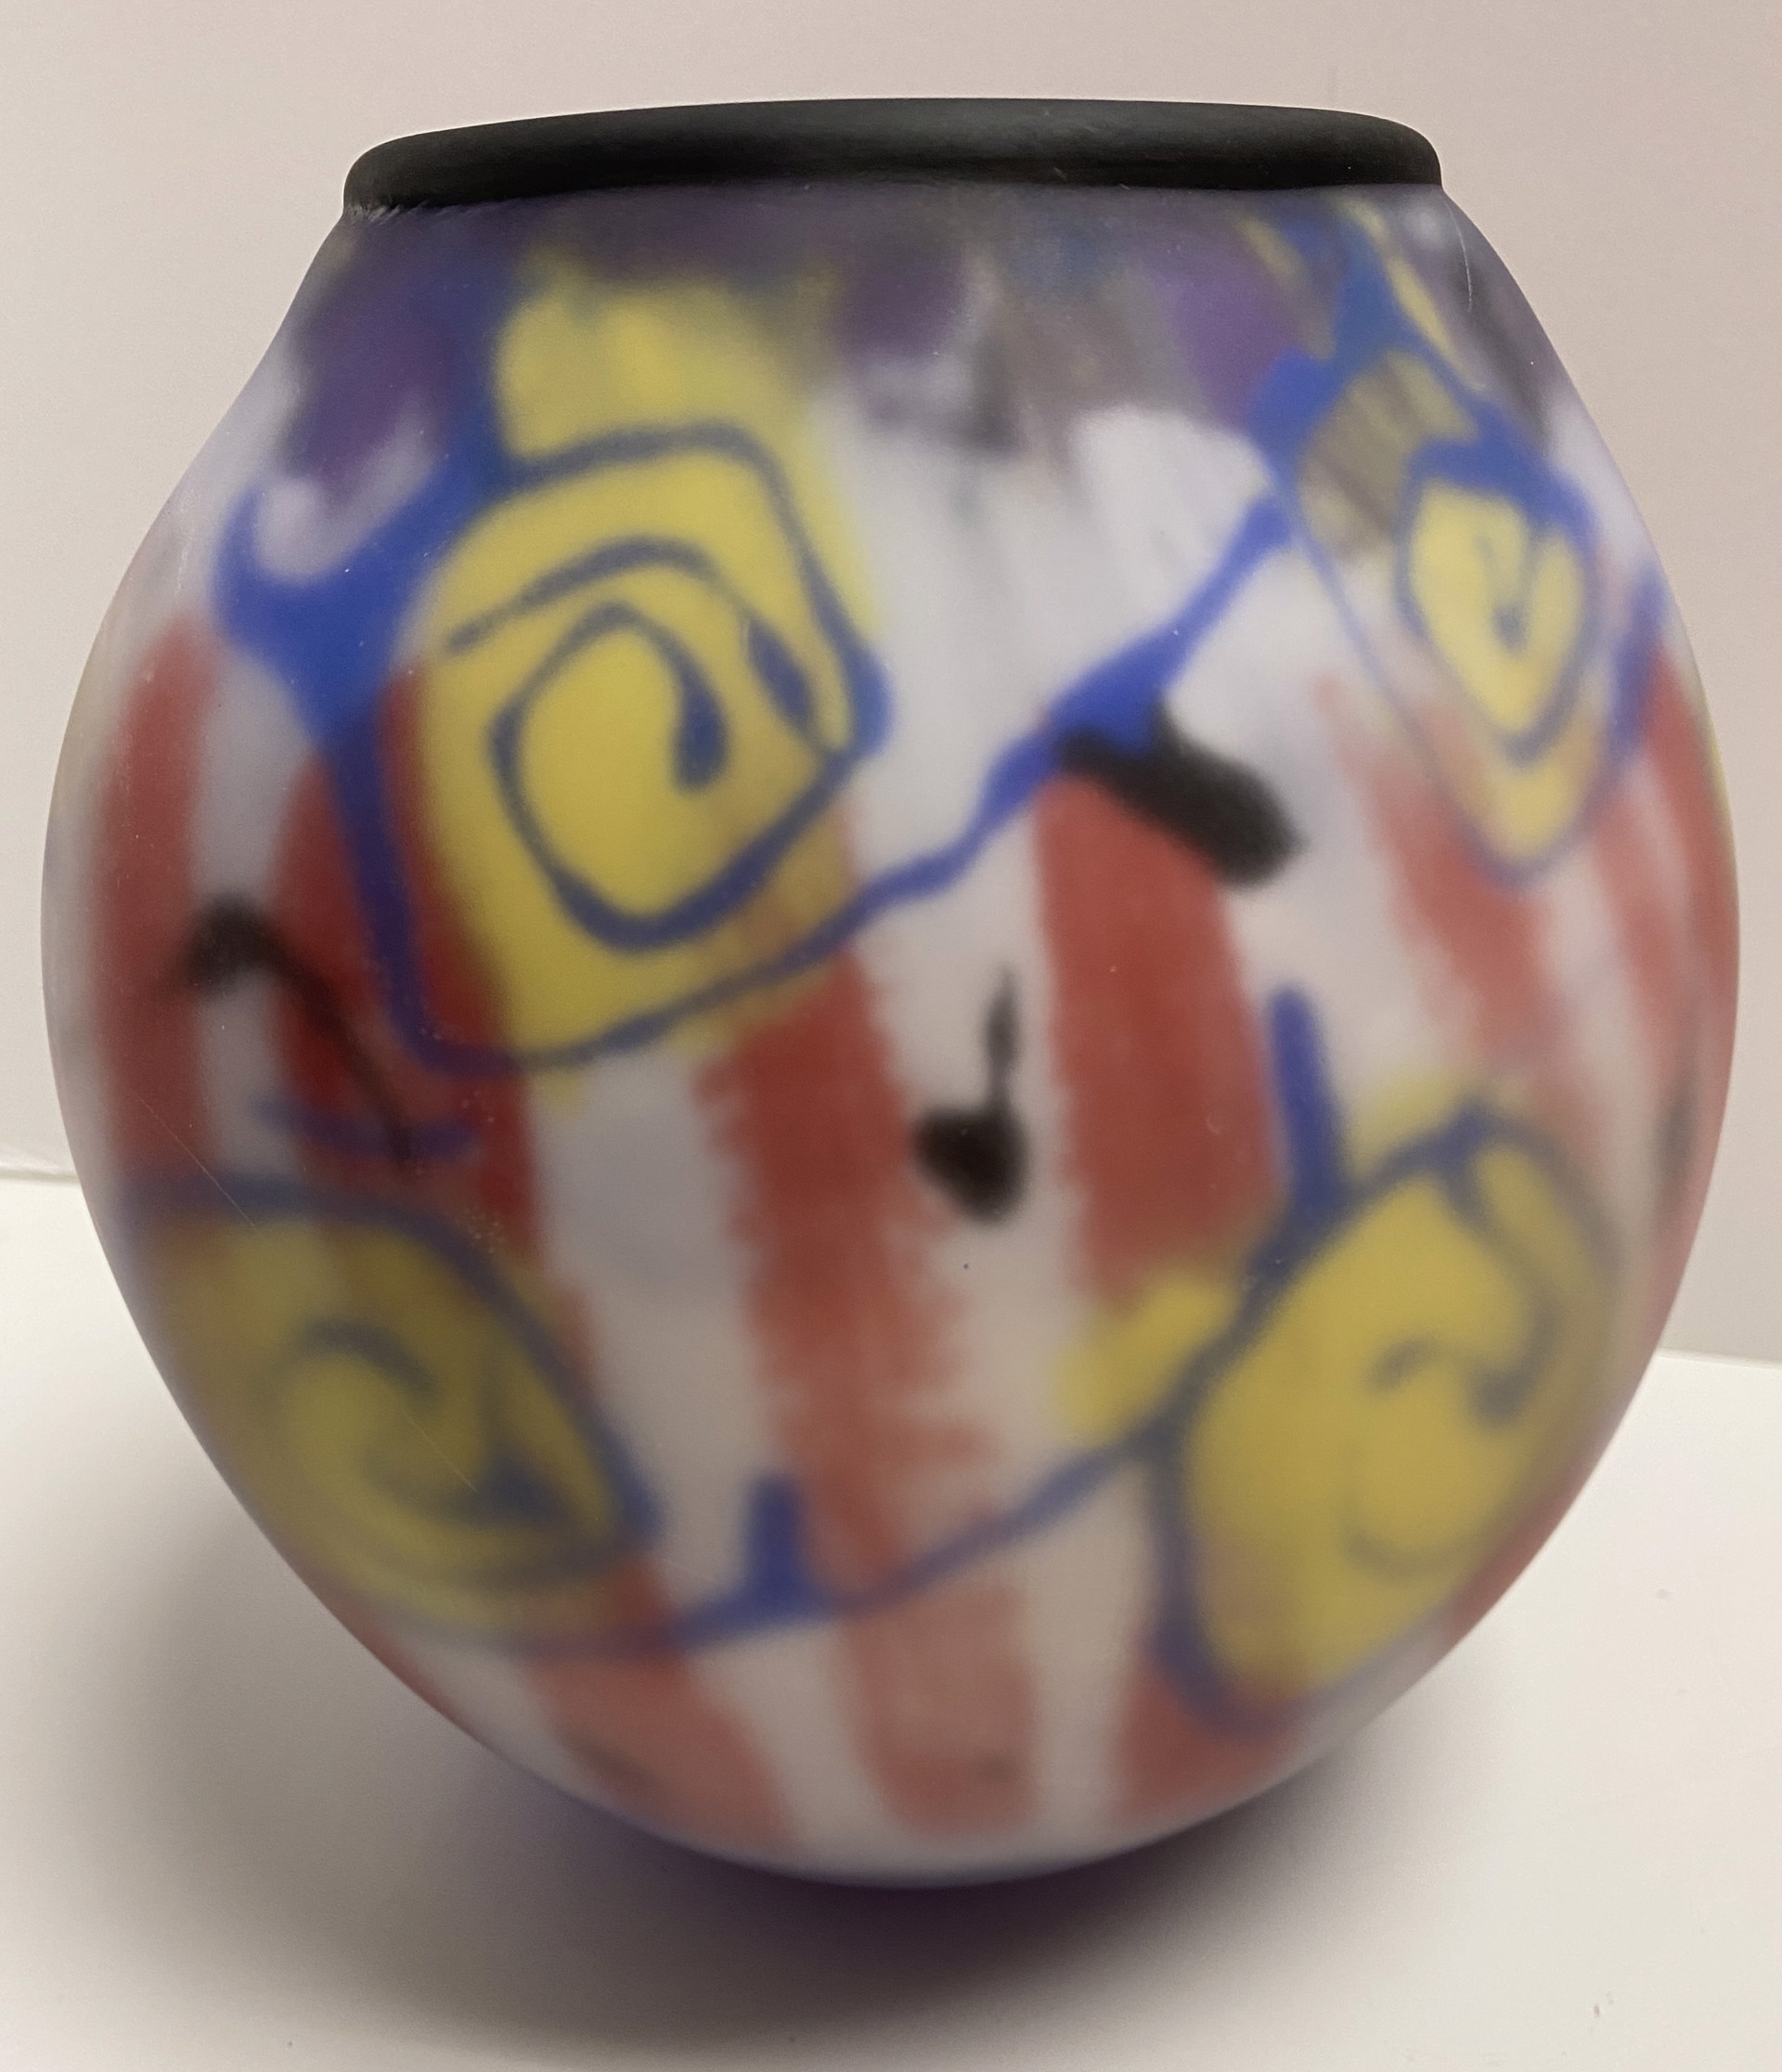 Painted Pot (sphere) by Rene Culler